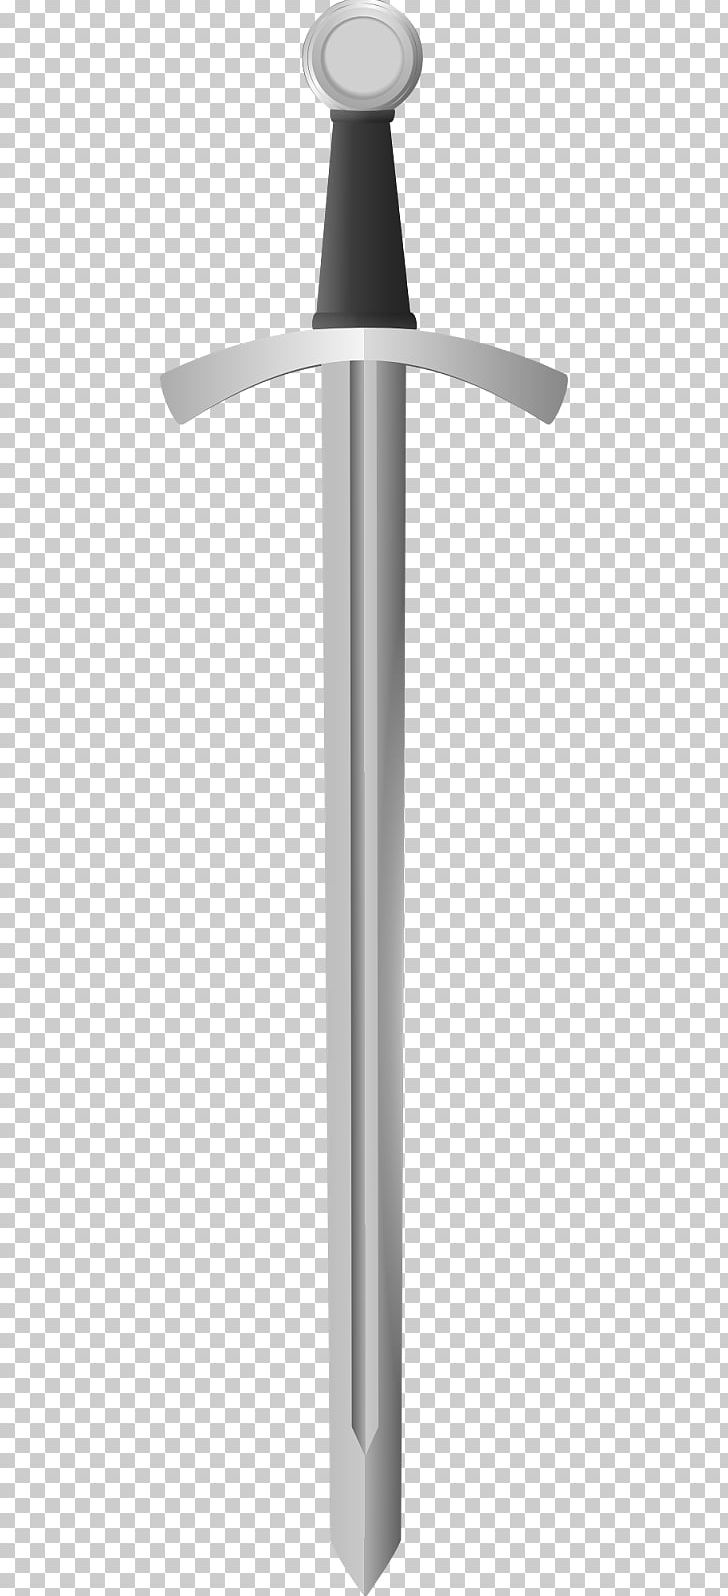 Clipart sword viking sword. Knightly png angle clip